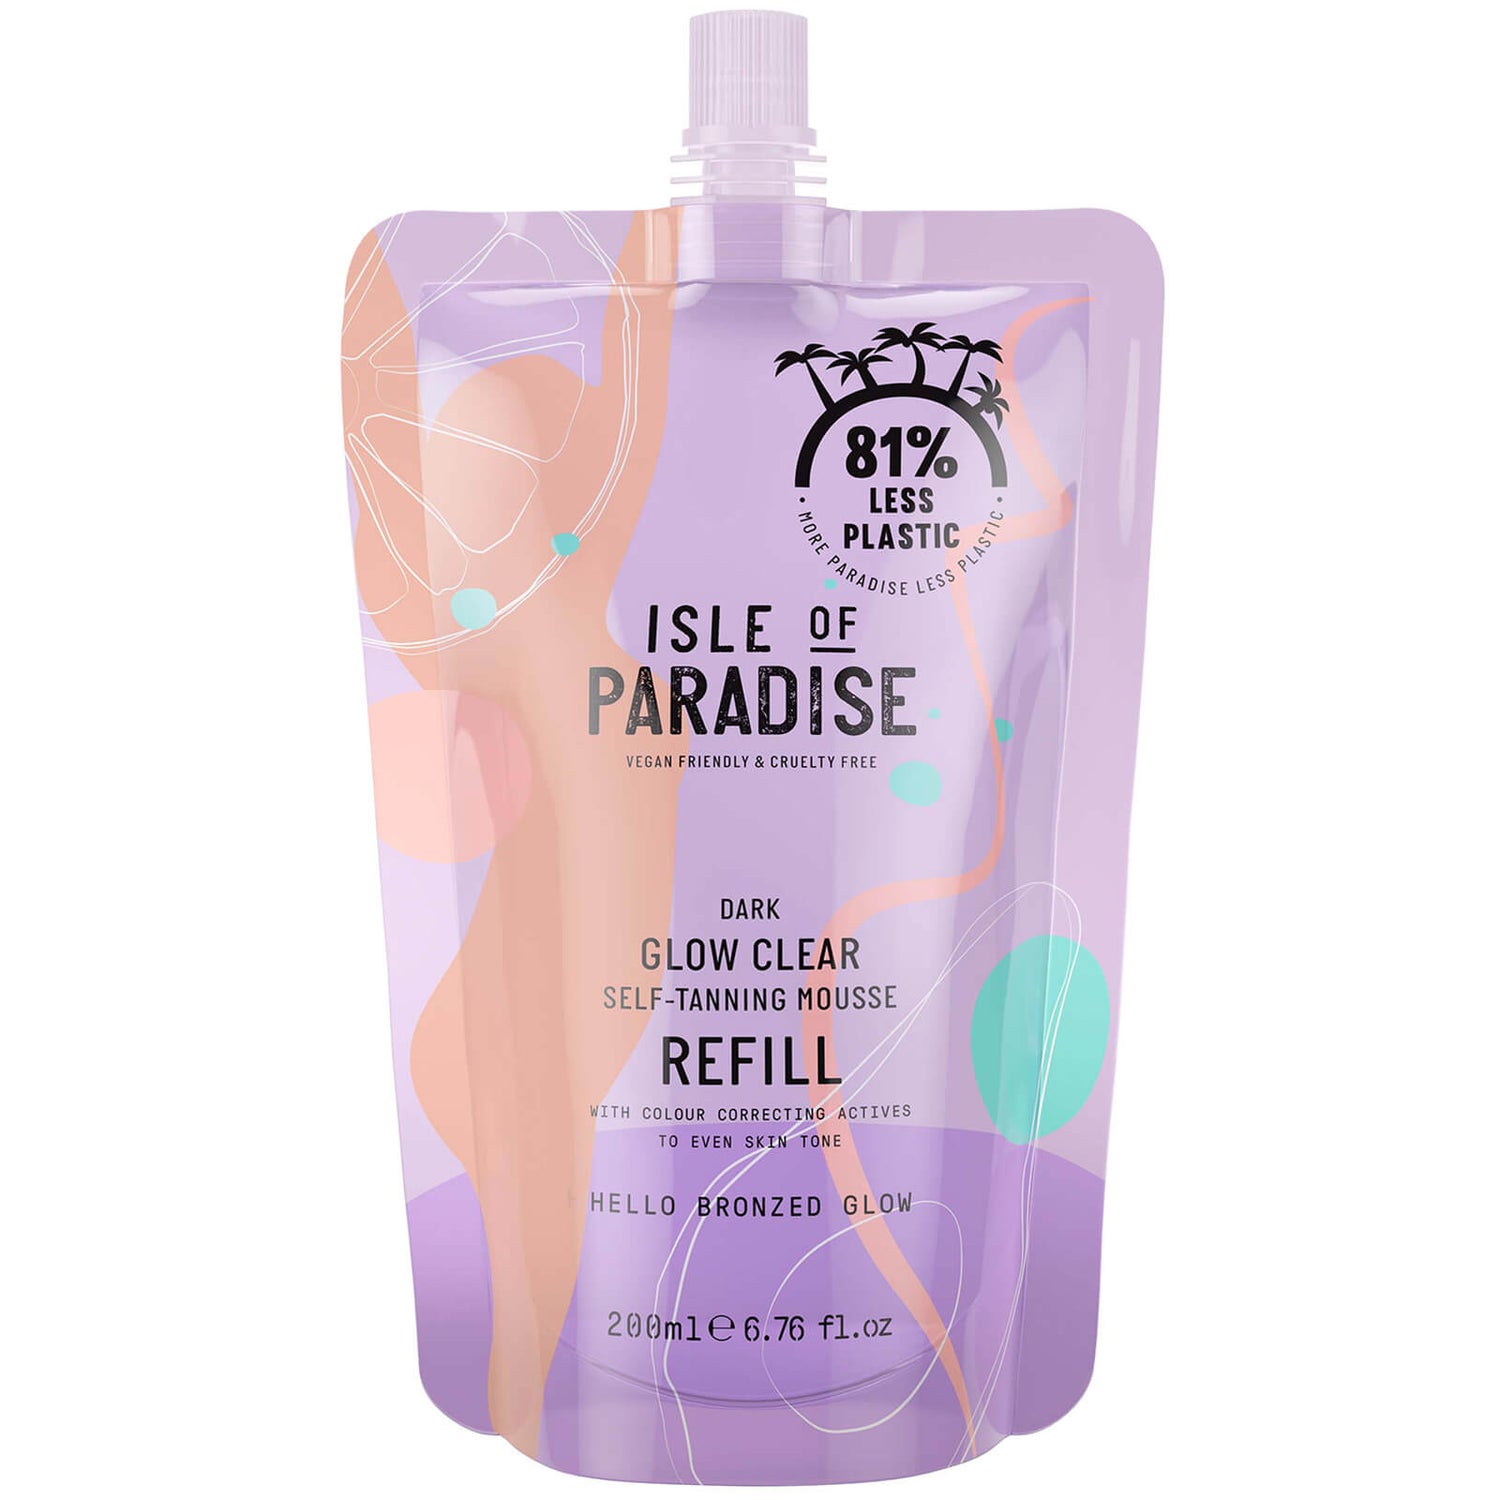 Isle of Paradise Glow Clear Self-Tanning Mousse Refill - Dark 200 ml